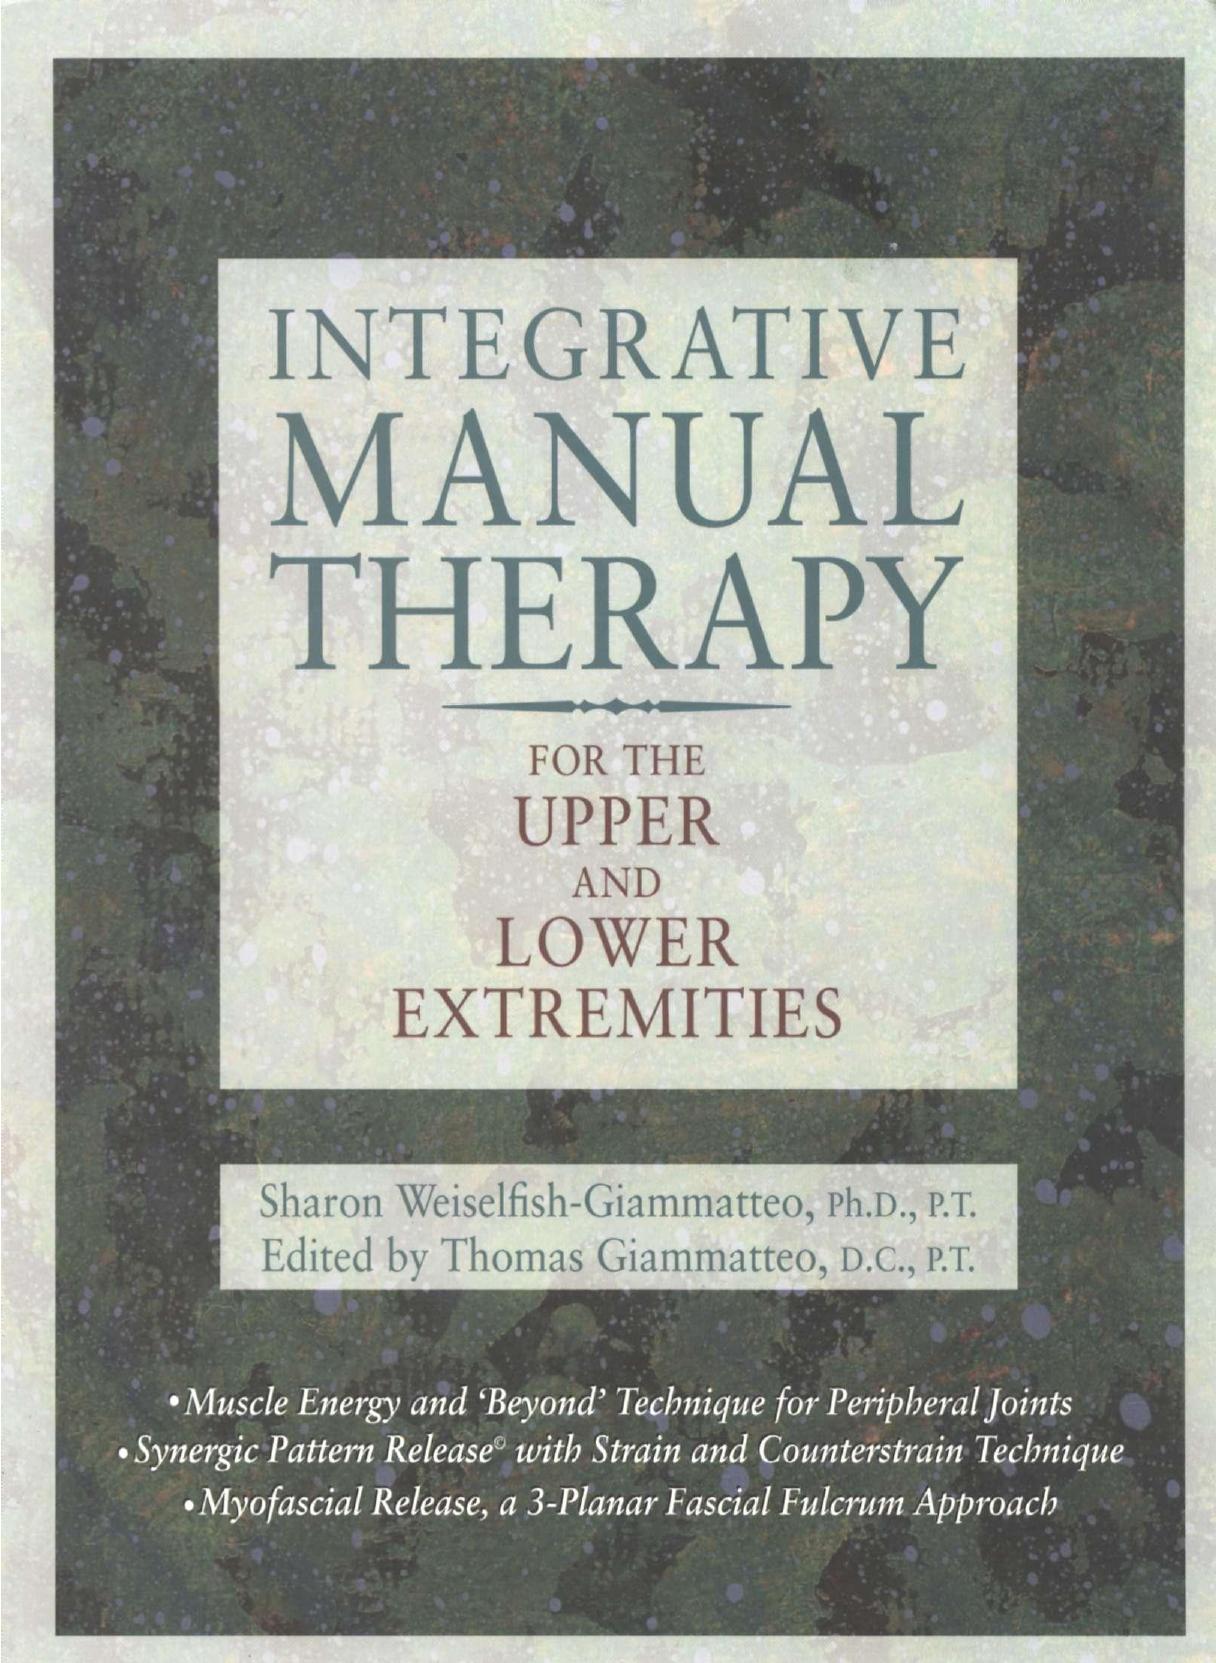 Integrative Manual Therapy FOR THE UPPER AND LOWER EXTREMITIES